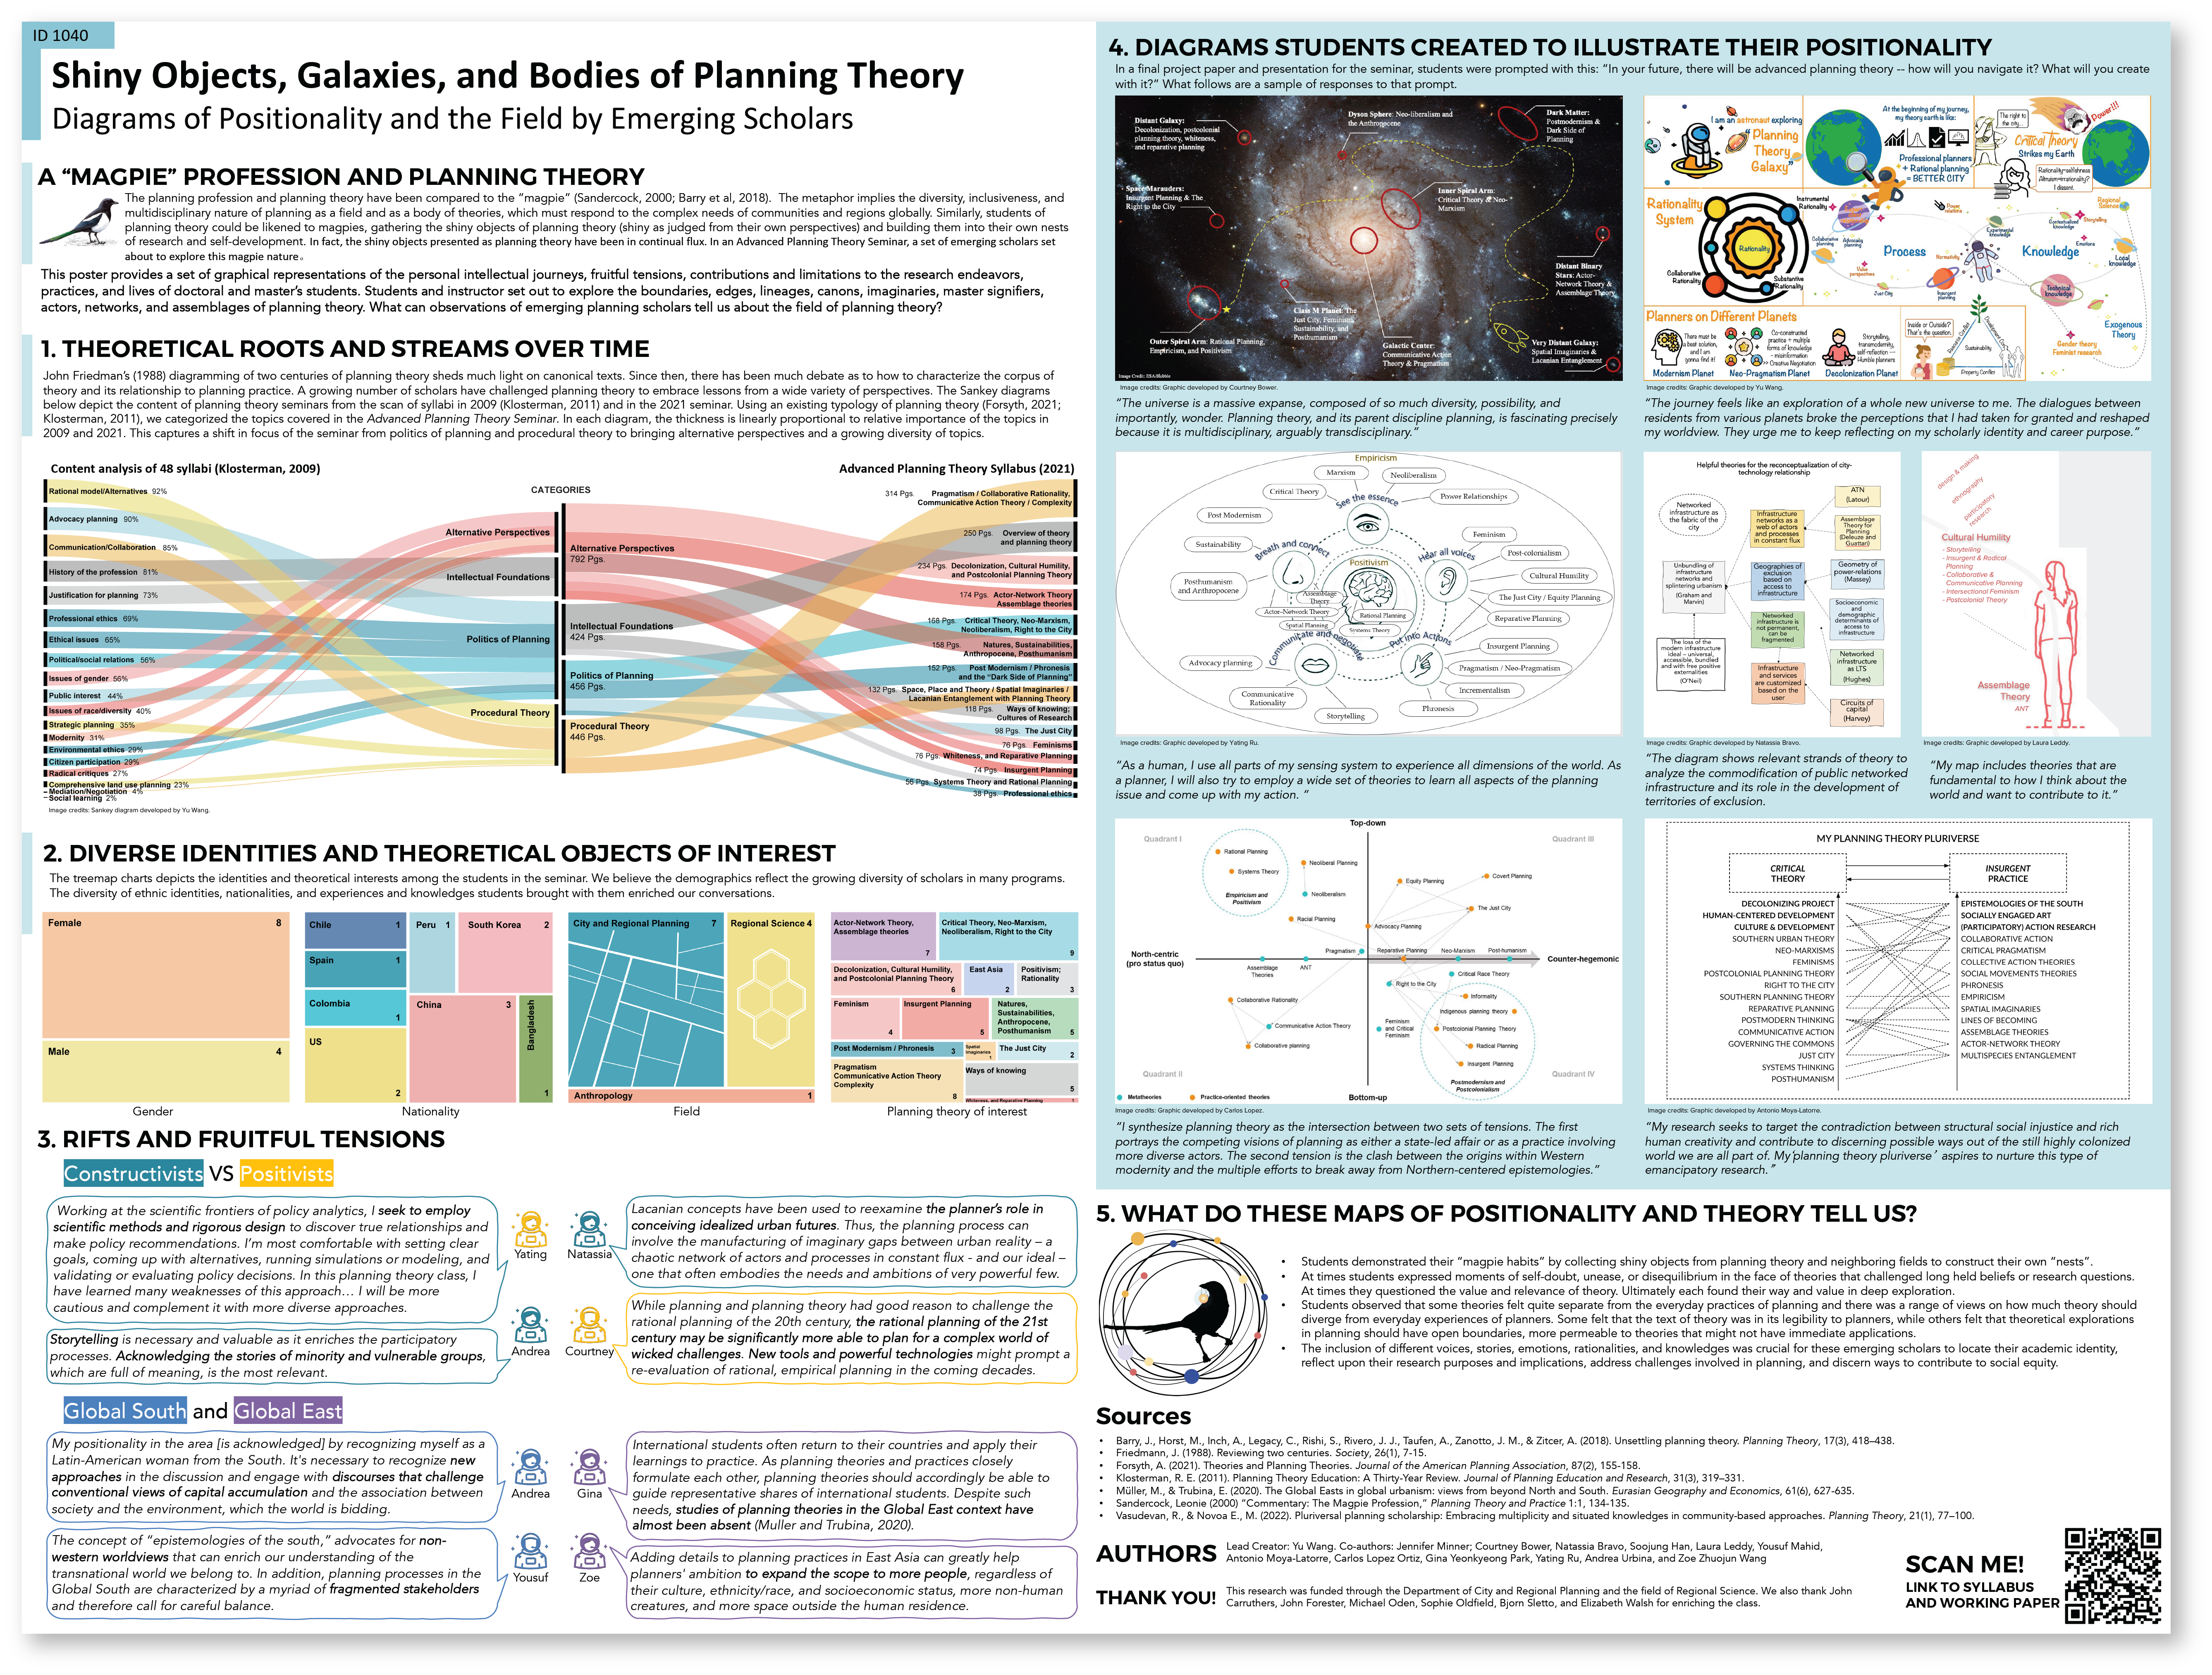 Thumbnail of Poster "Shiny Objects, Galaxies, Bodies of Planning Theory" for Association of Collegiate Schools of Planning.